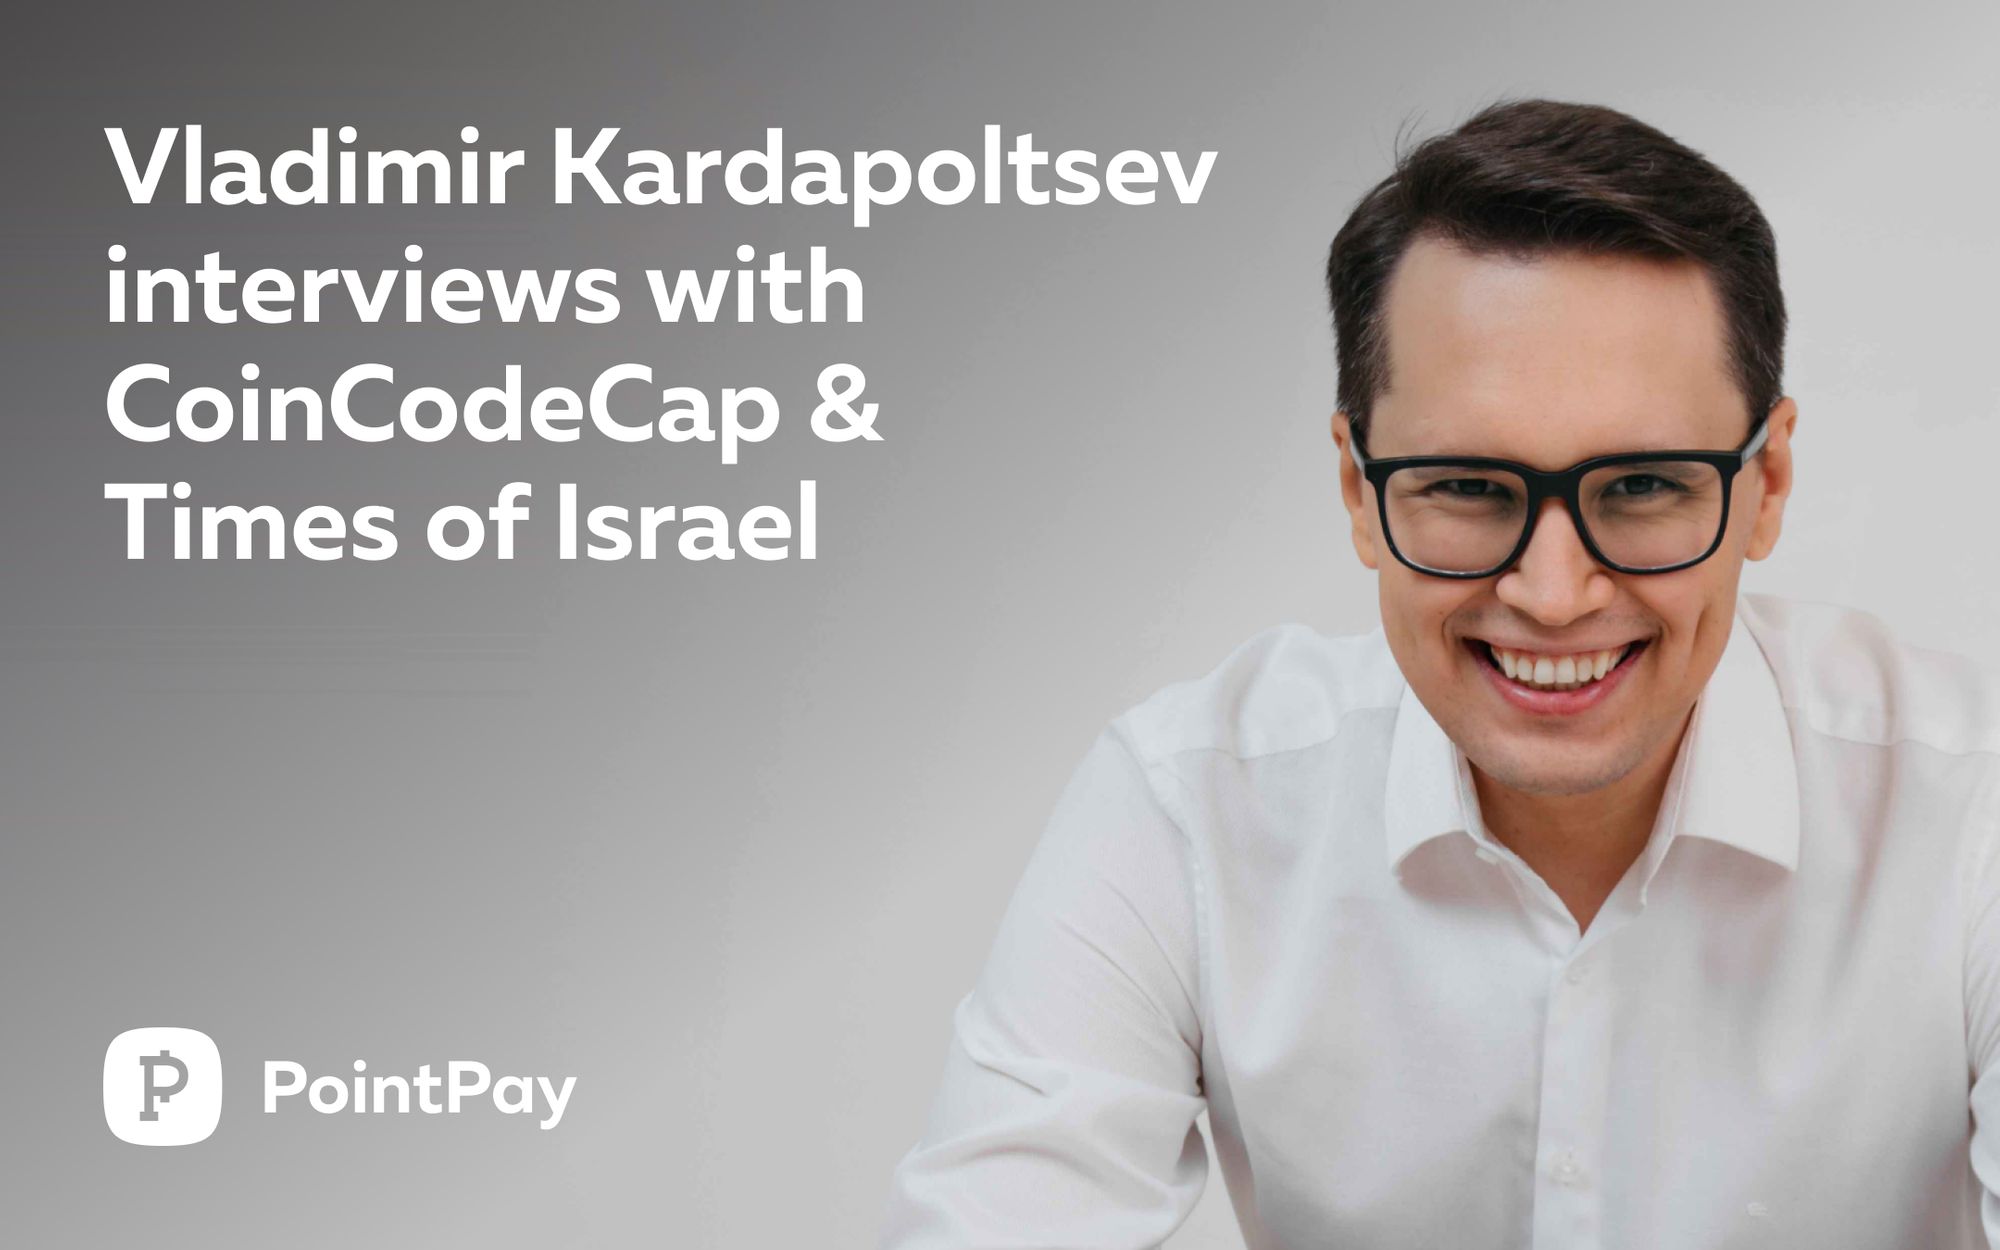 PointPay CEO — Vladimir Kardapoltsev spoke with CoinCodeCap & Times of Israel